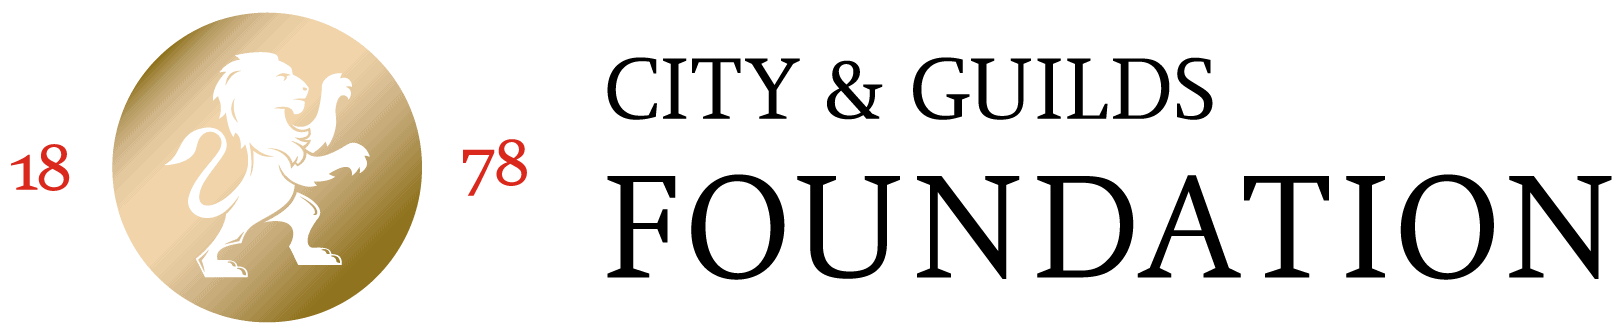 City and Guilds Foundation logo